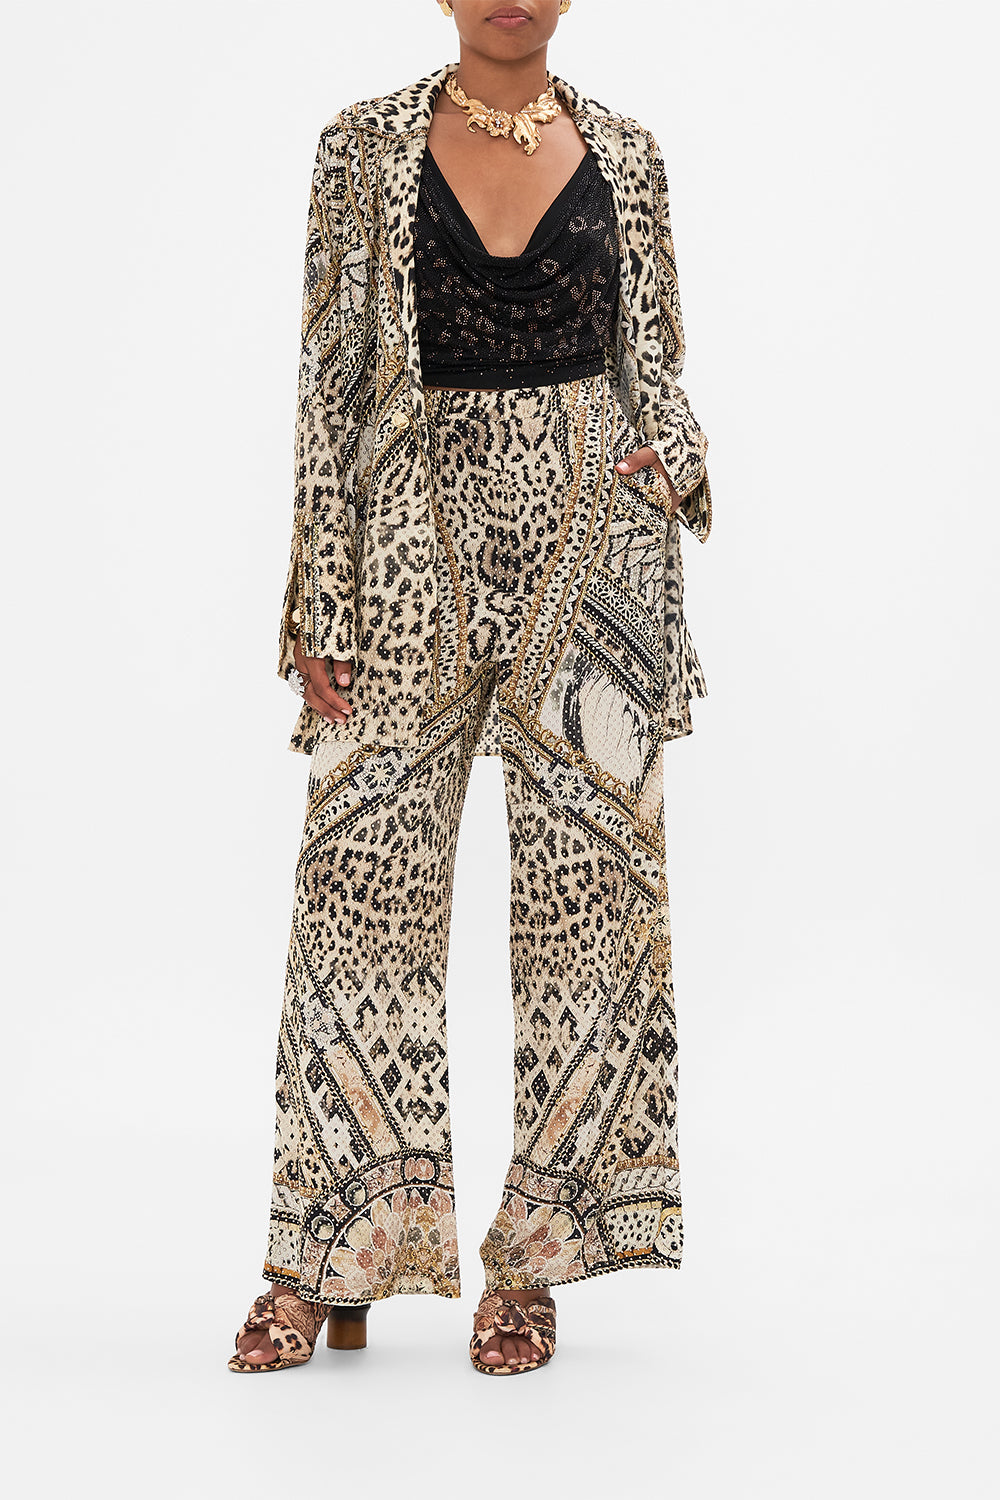 Style view of model wearing CAMILLA silk animal print pants in Mosaic Muse 